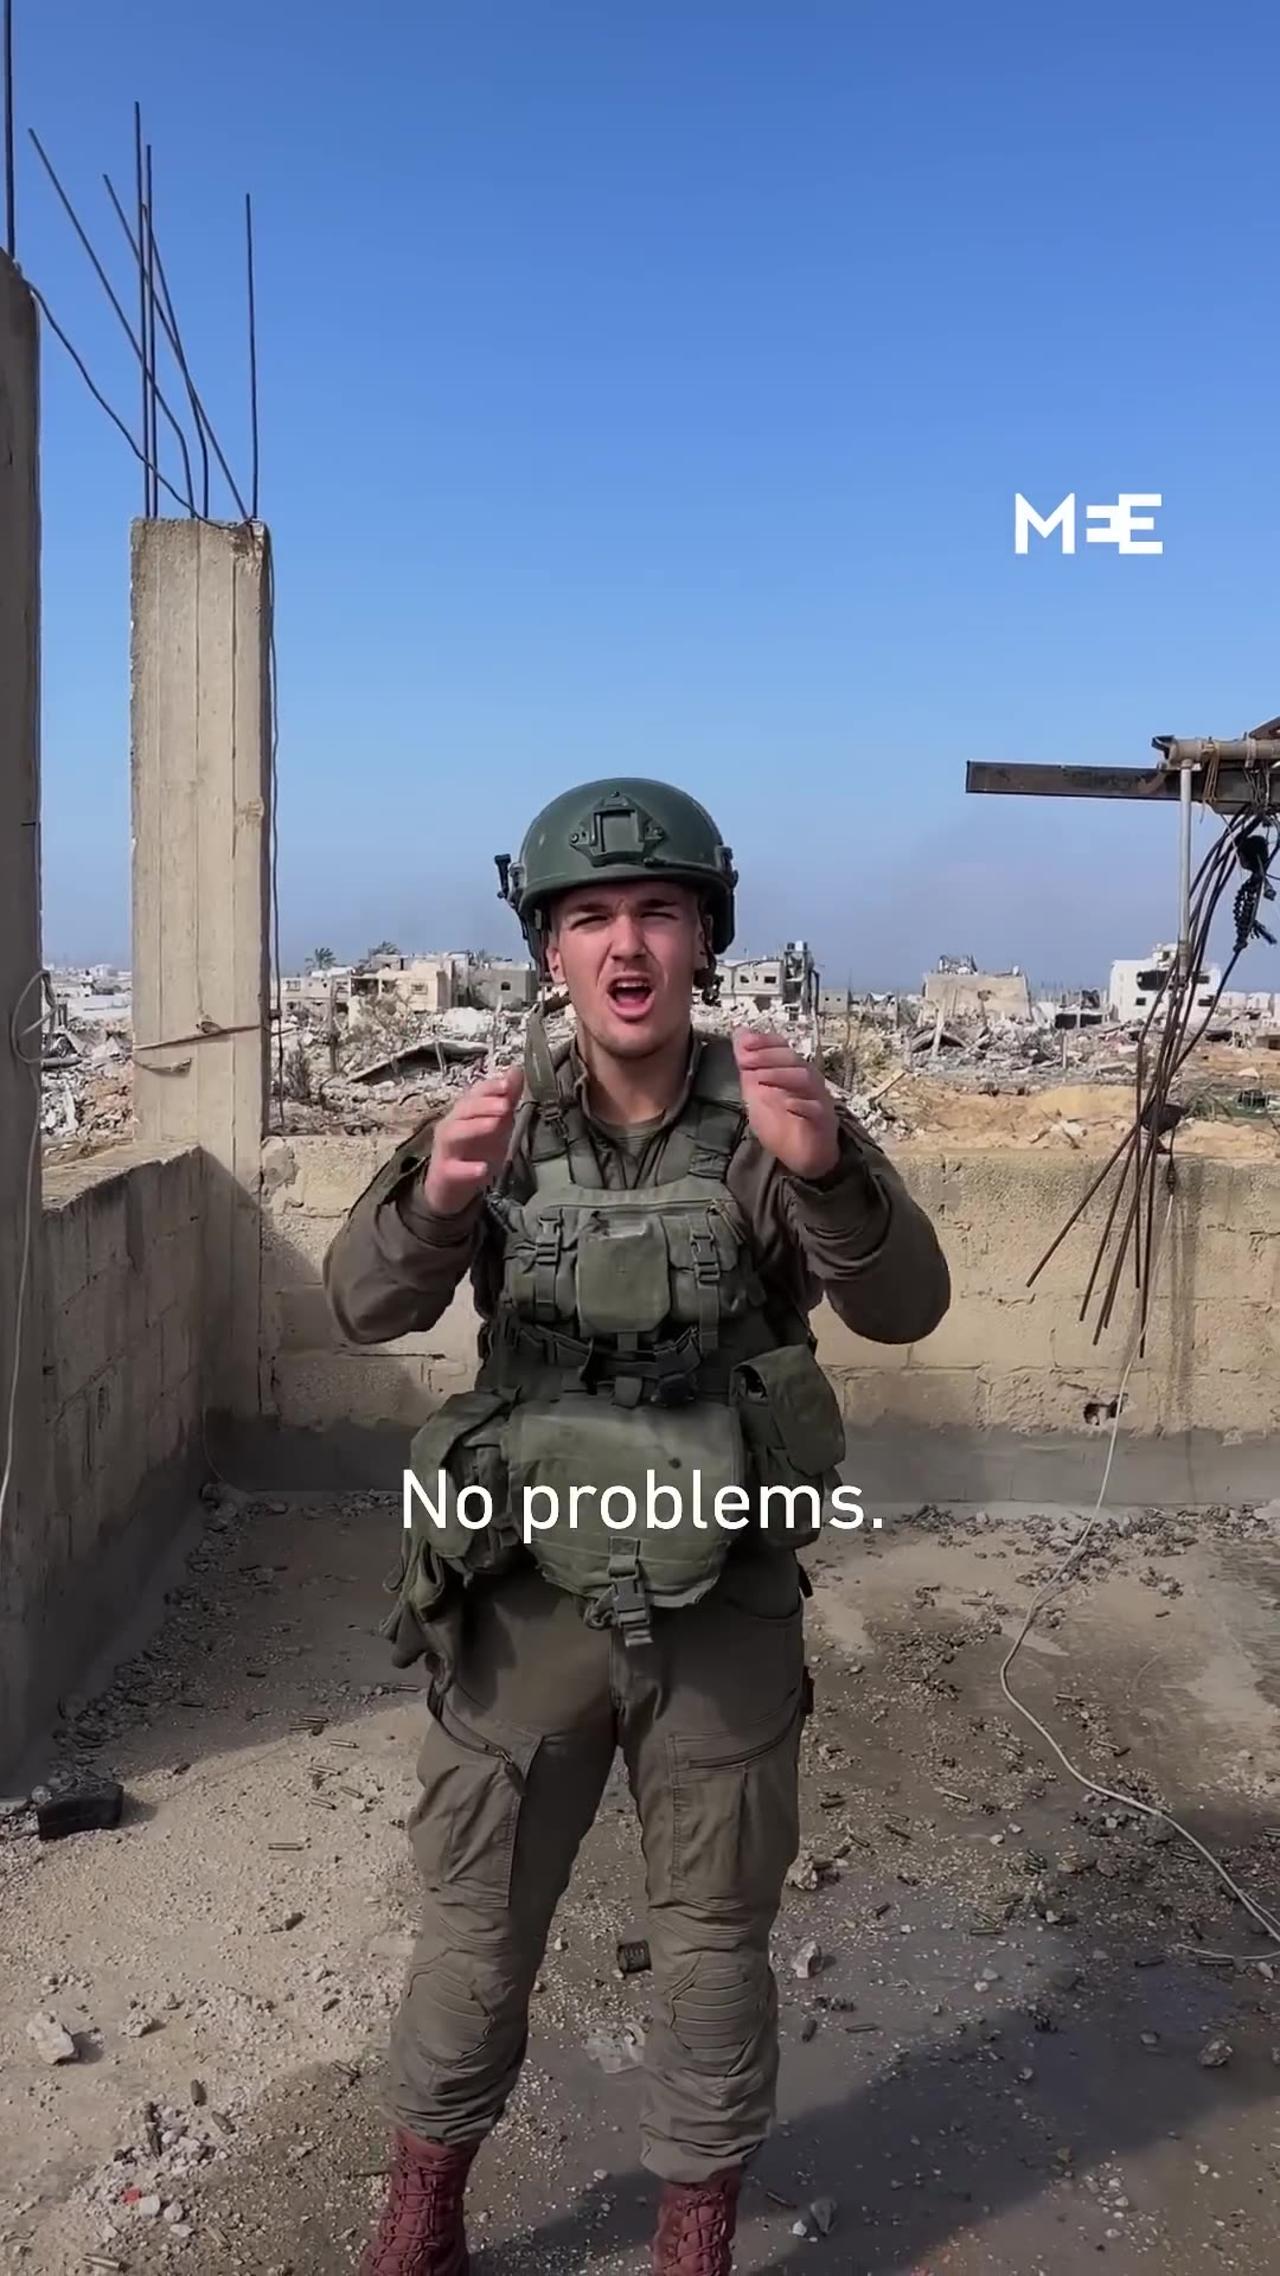 South African-Israeli soldier publishes social media video making fun of fighting in Gaza